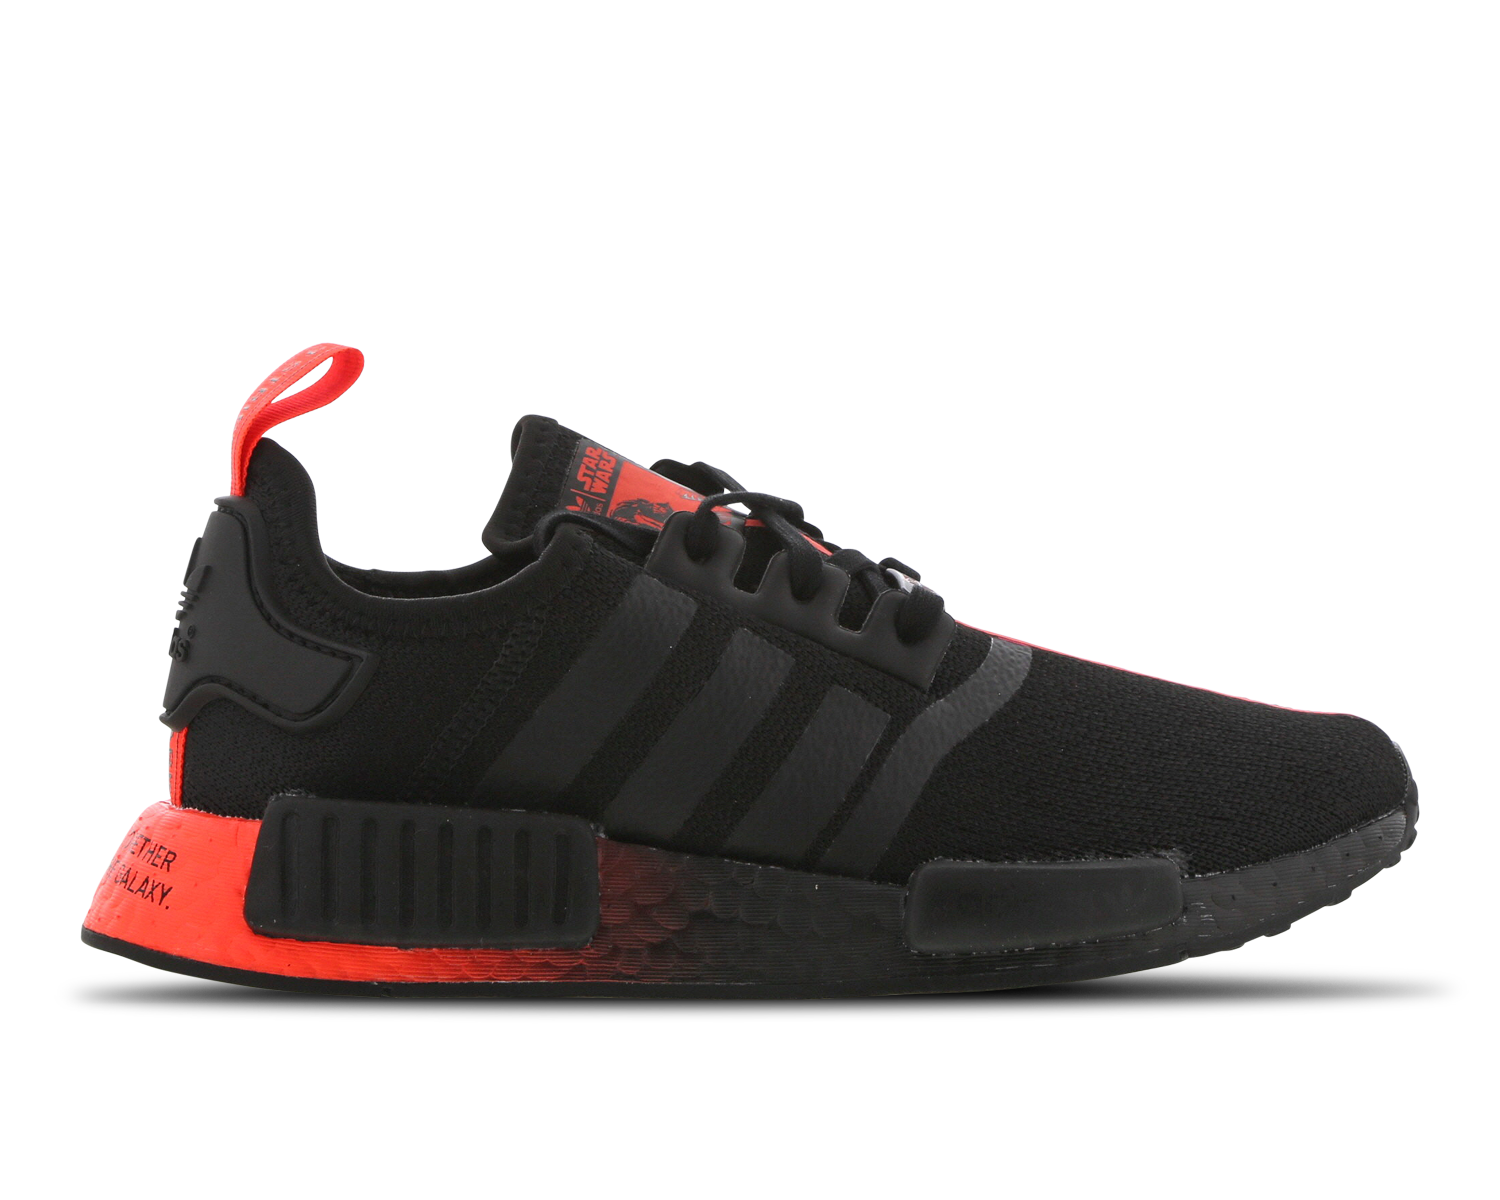 Adidas Nmd R1 WoMens Shoes Clothing and Bags with